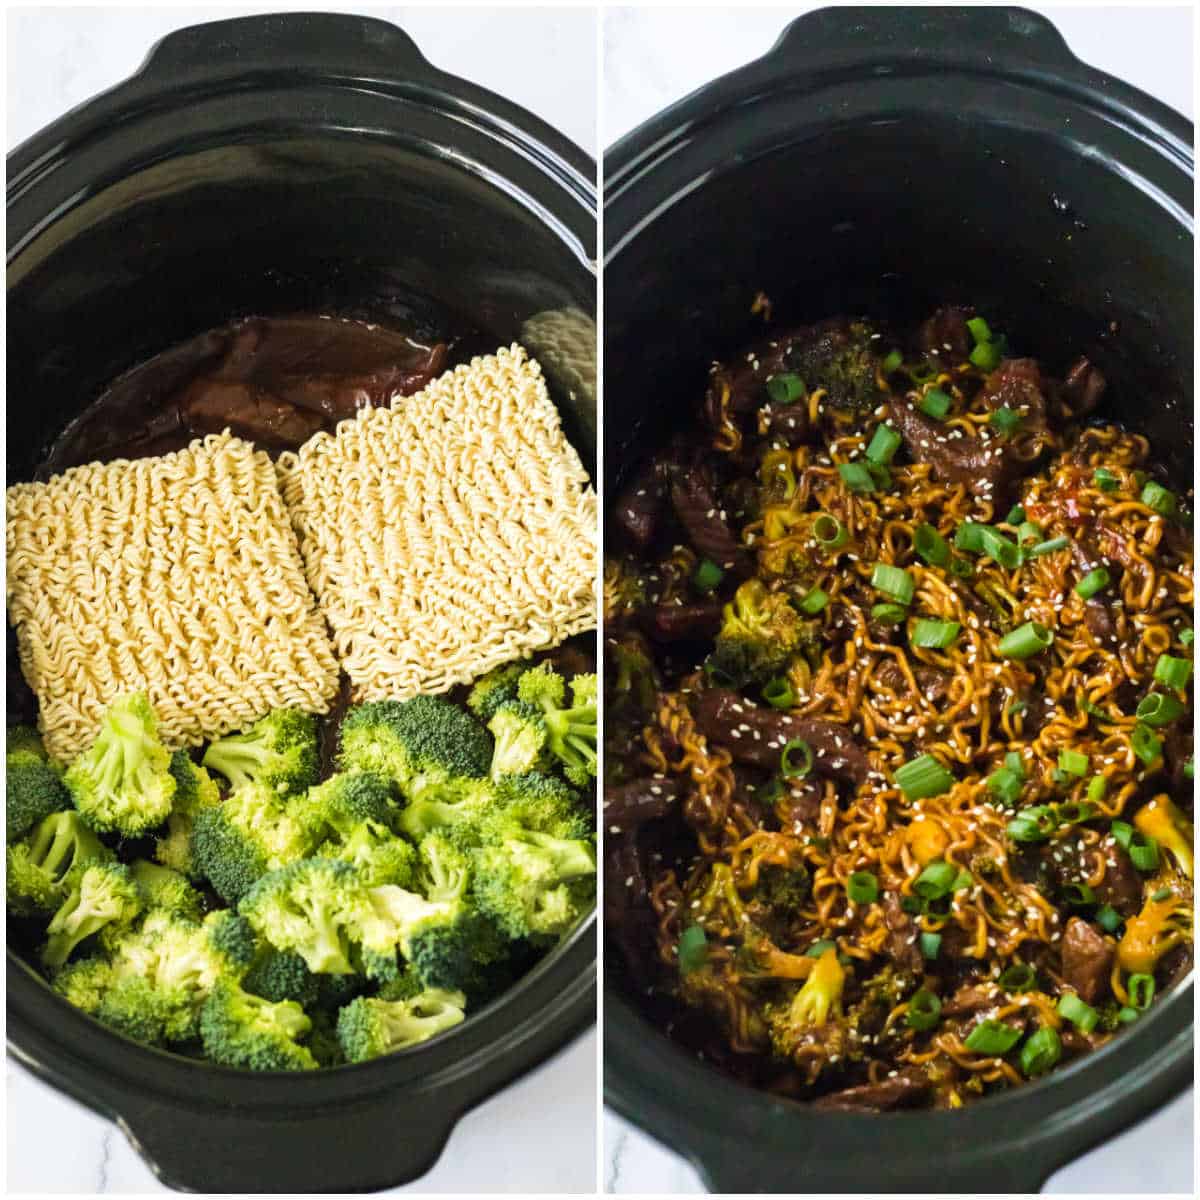 Steps to make slow cooker beef and broccoli ramen. 